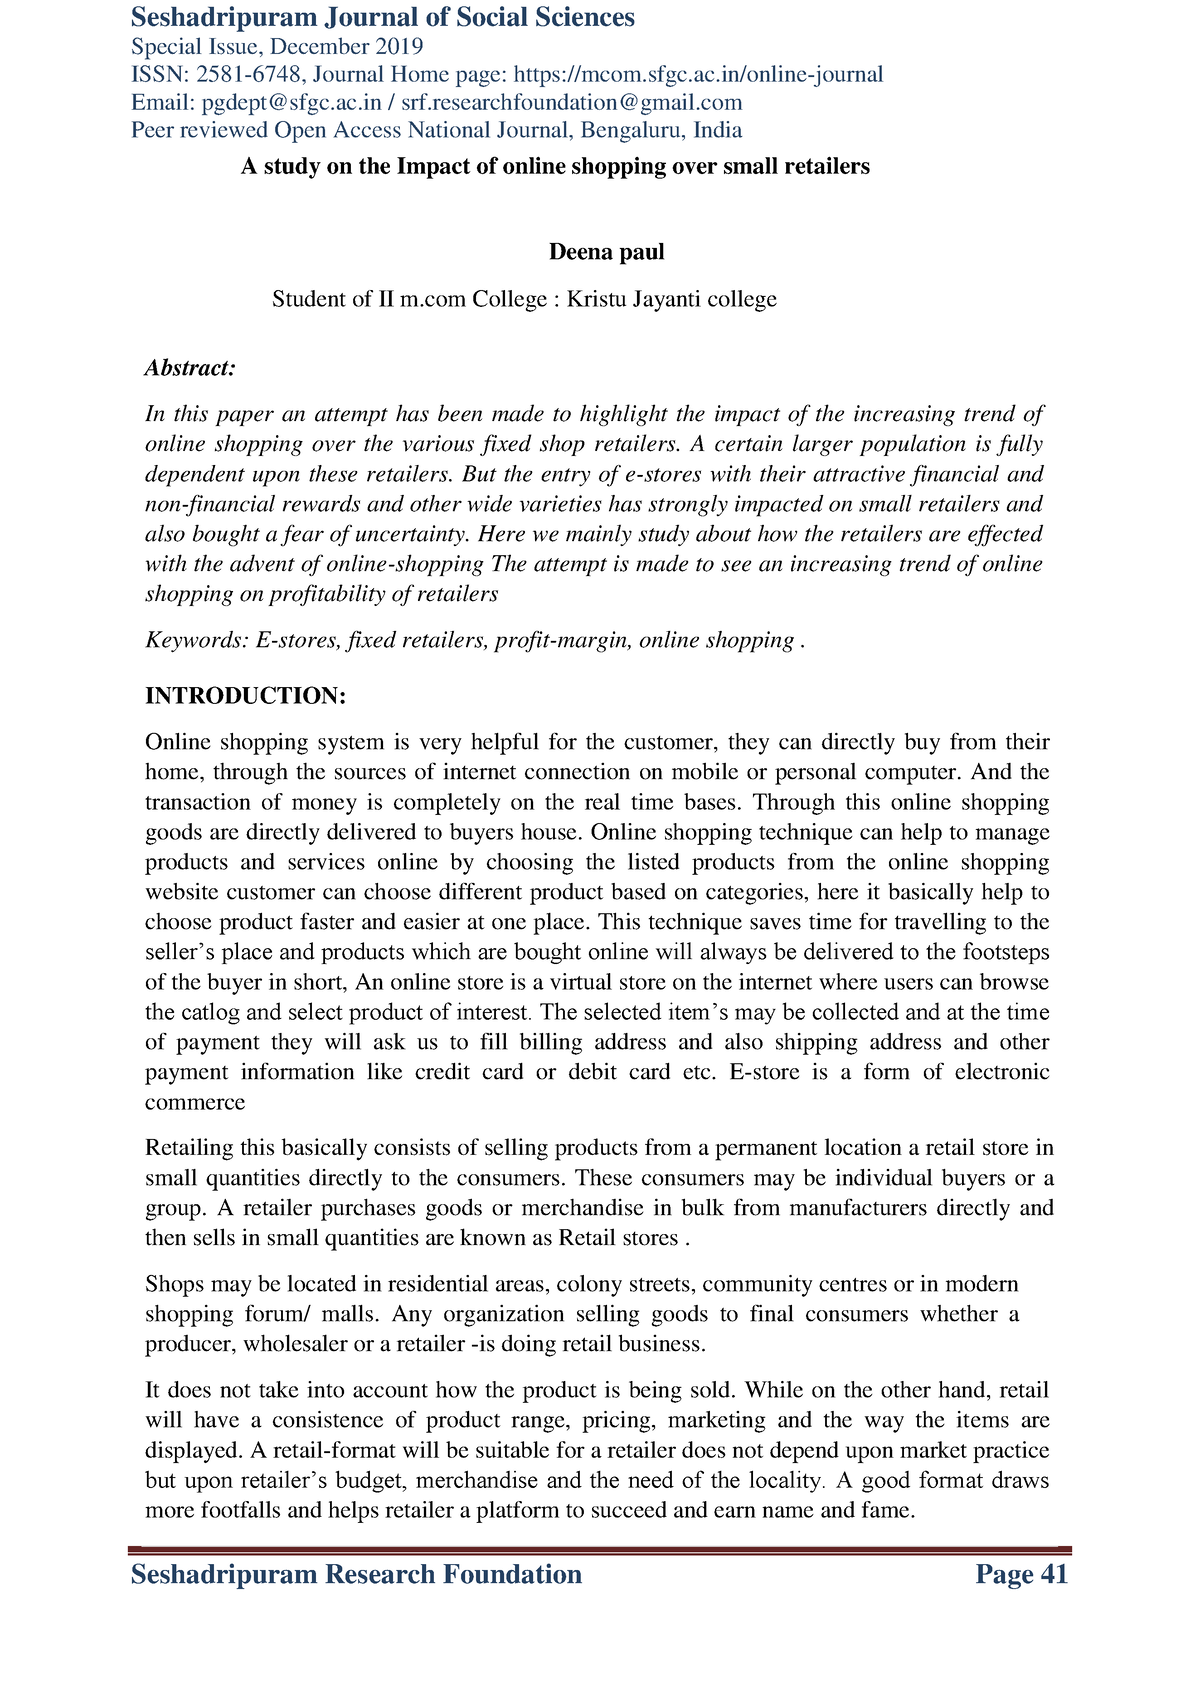 research paper on impact of online shopping